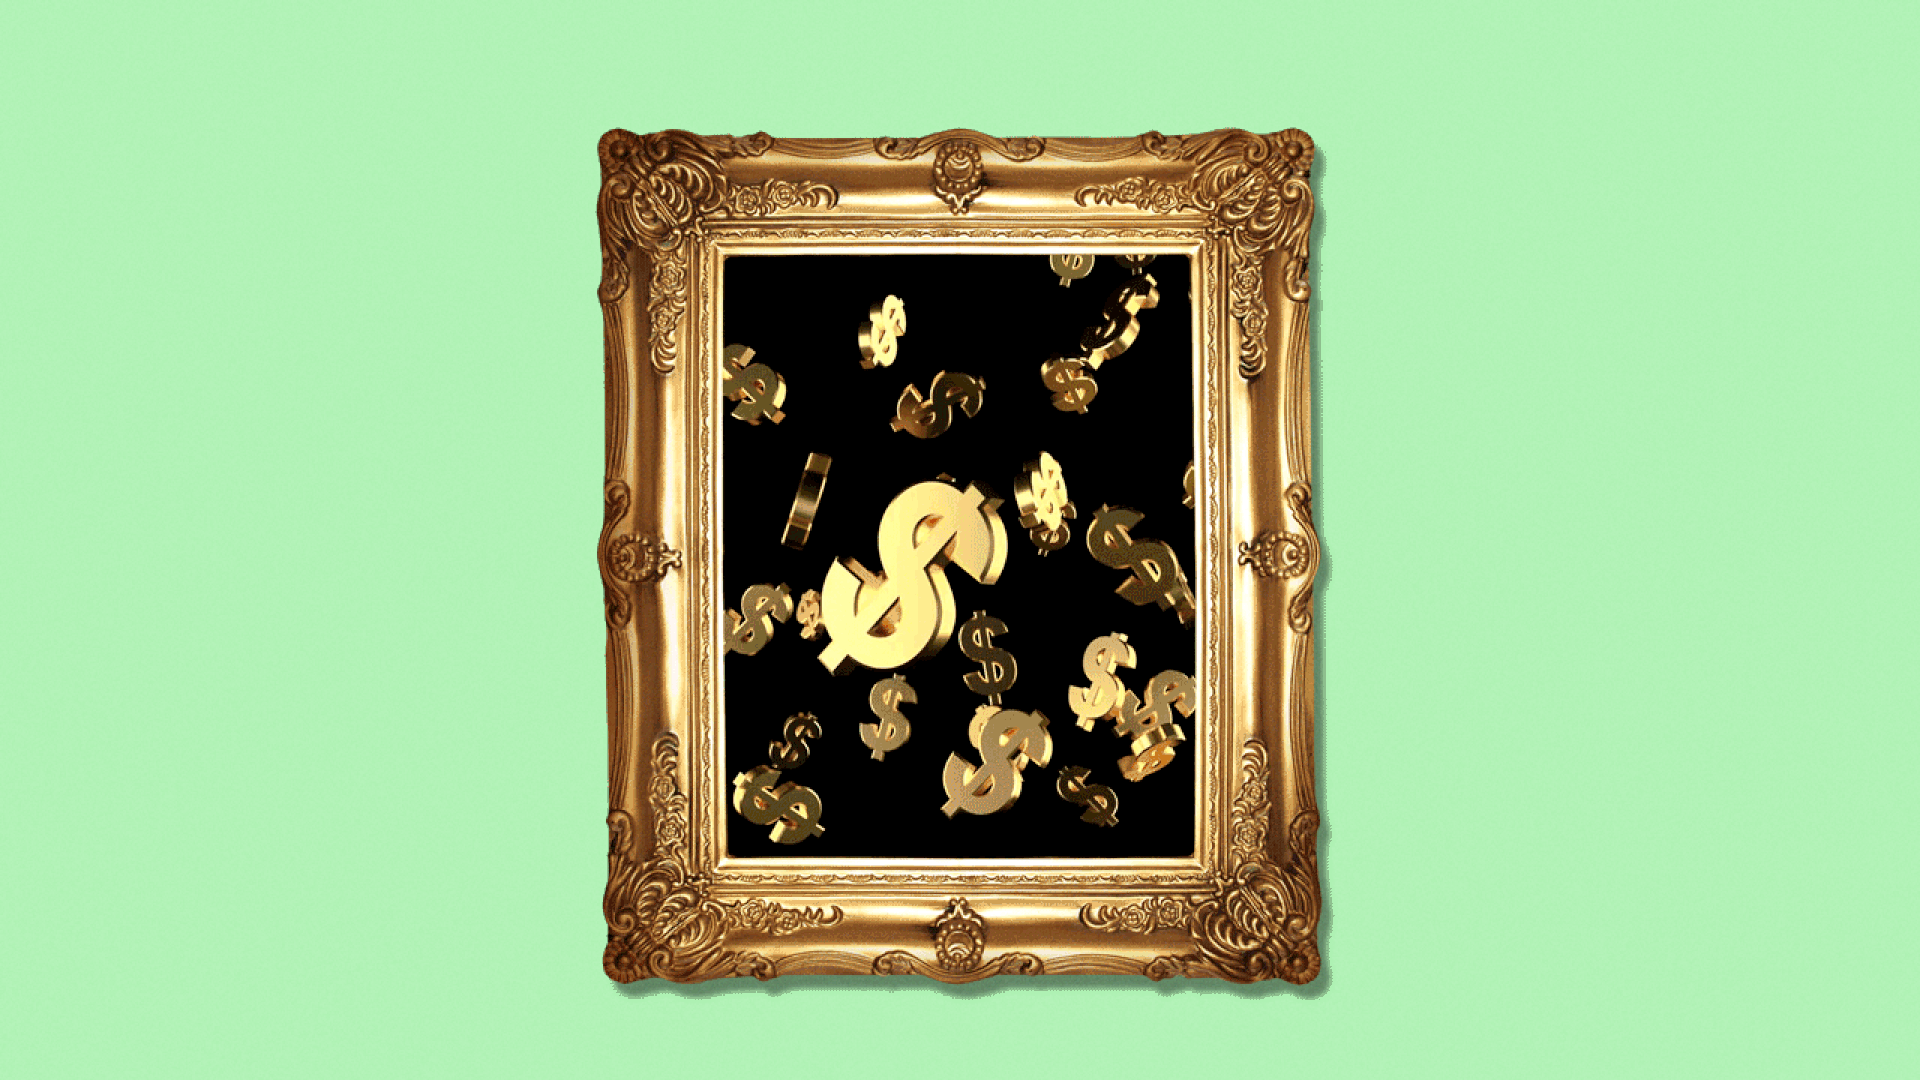 Animated illustration of an ornate frame with falling dollar signs